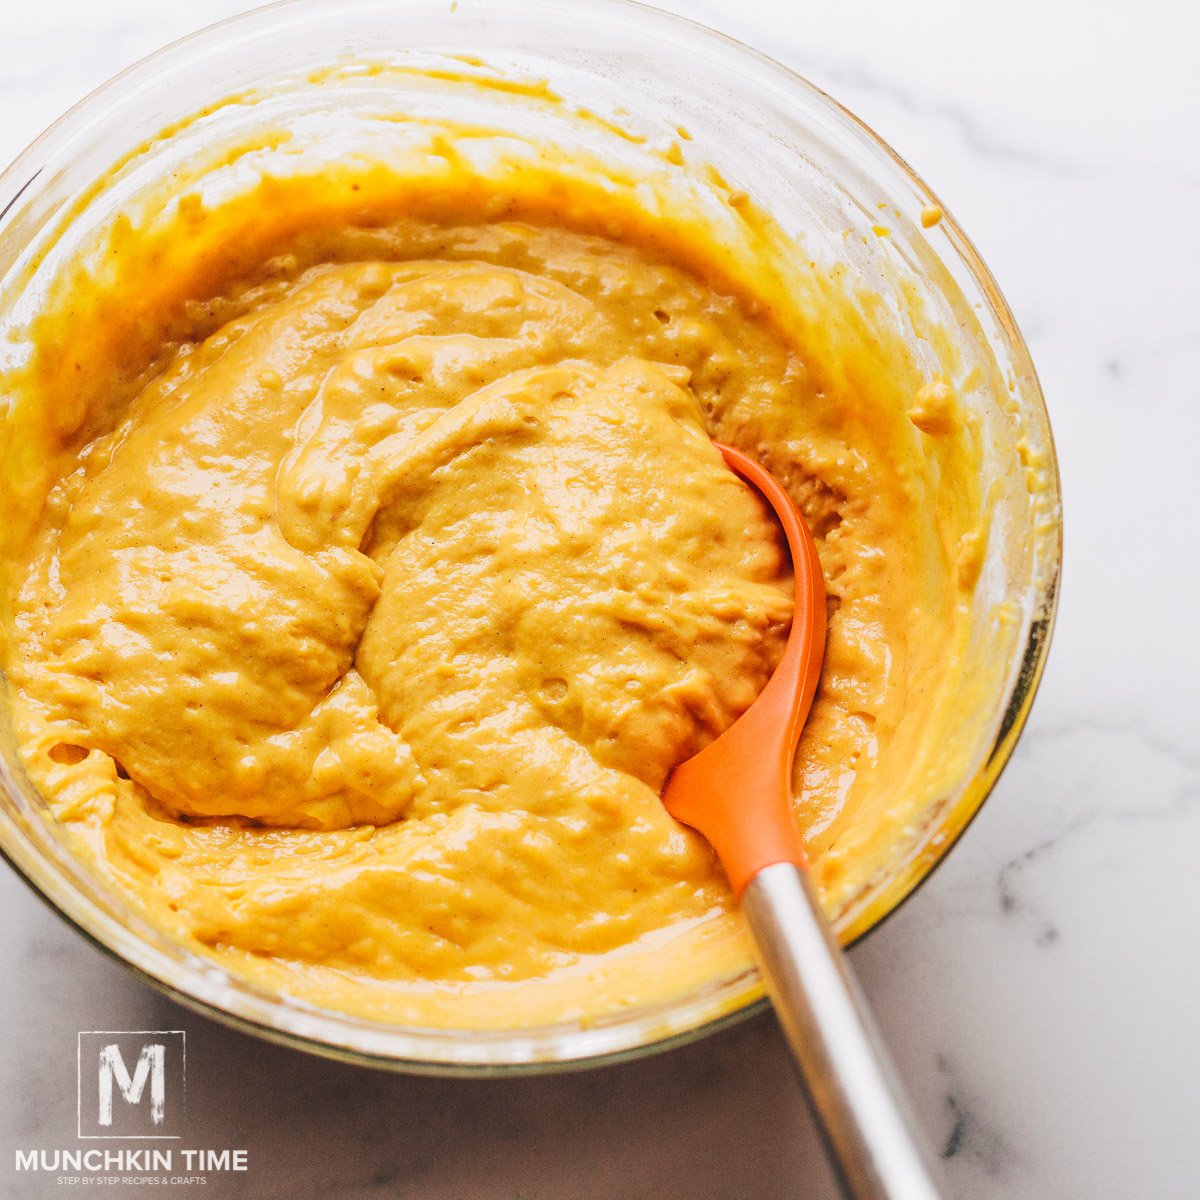 Combine wet ingredients with dry ingredients to make pumpkin waffle batter.